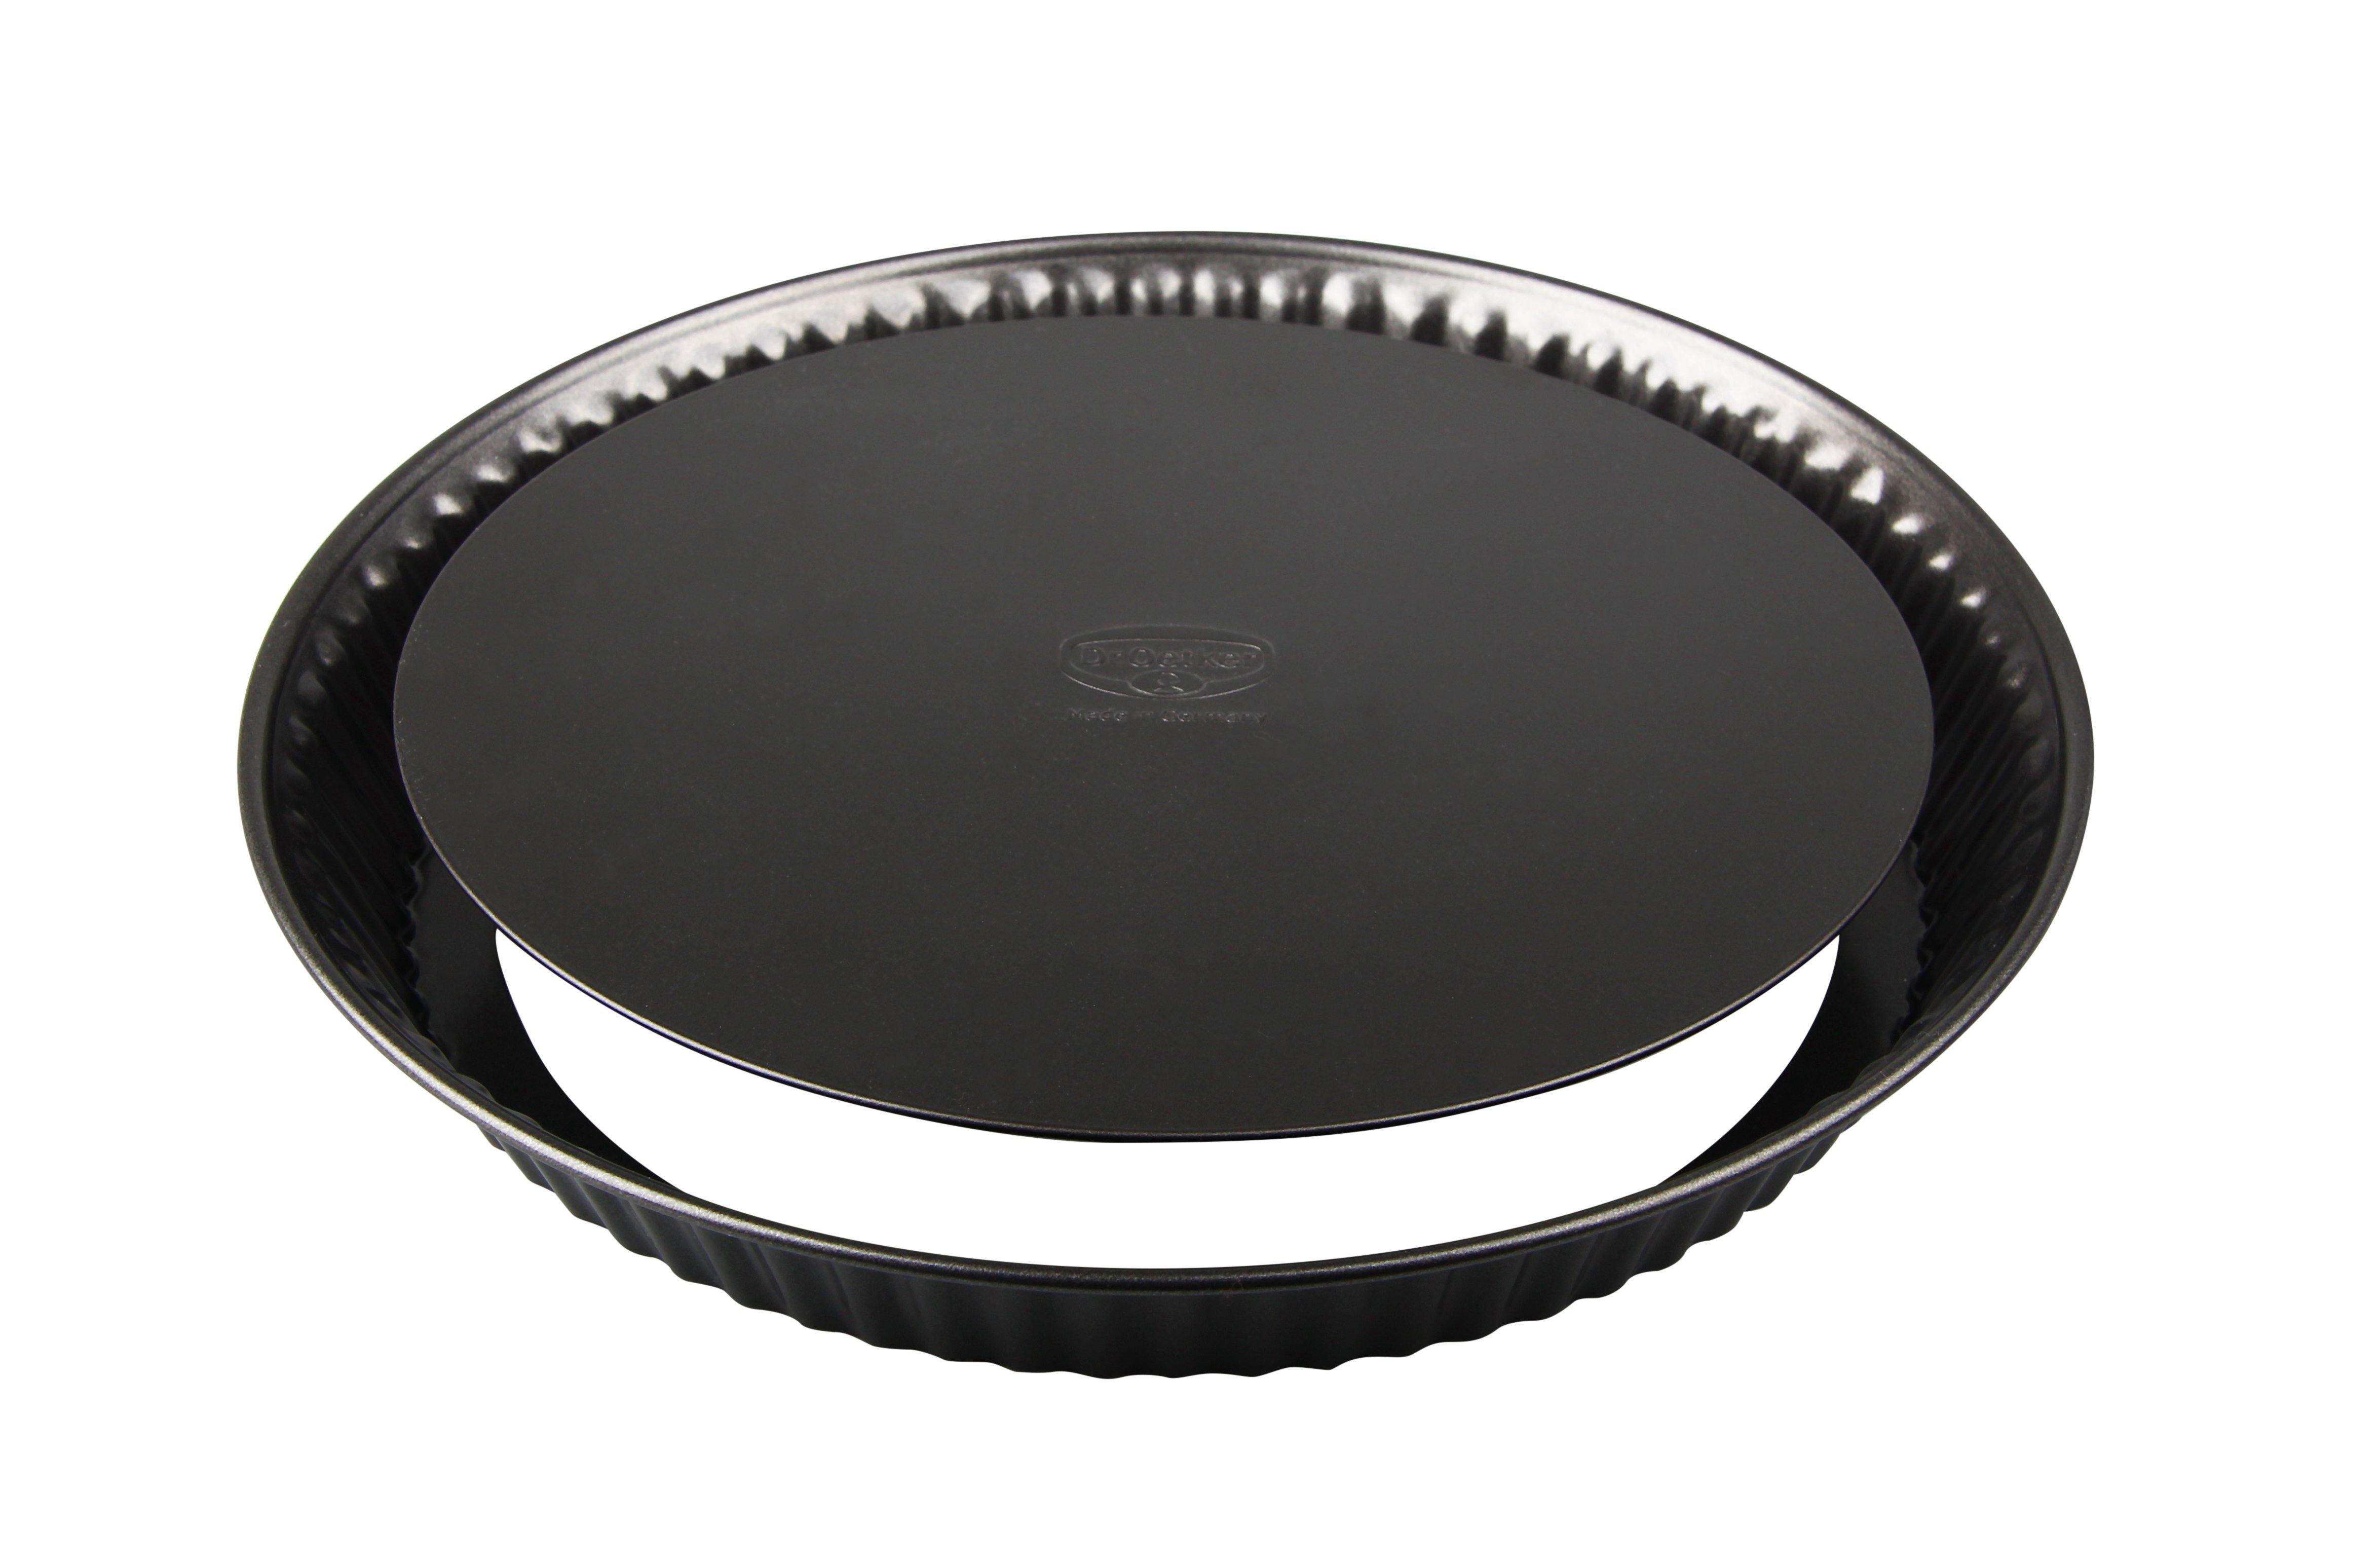 Dr. Oetker "Tradition" Tart Tin, Black, 28X4 Cm - Whole and All